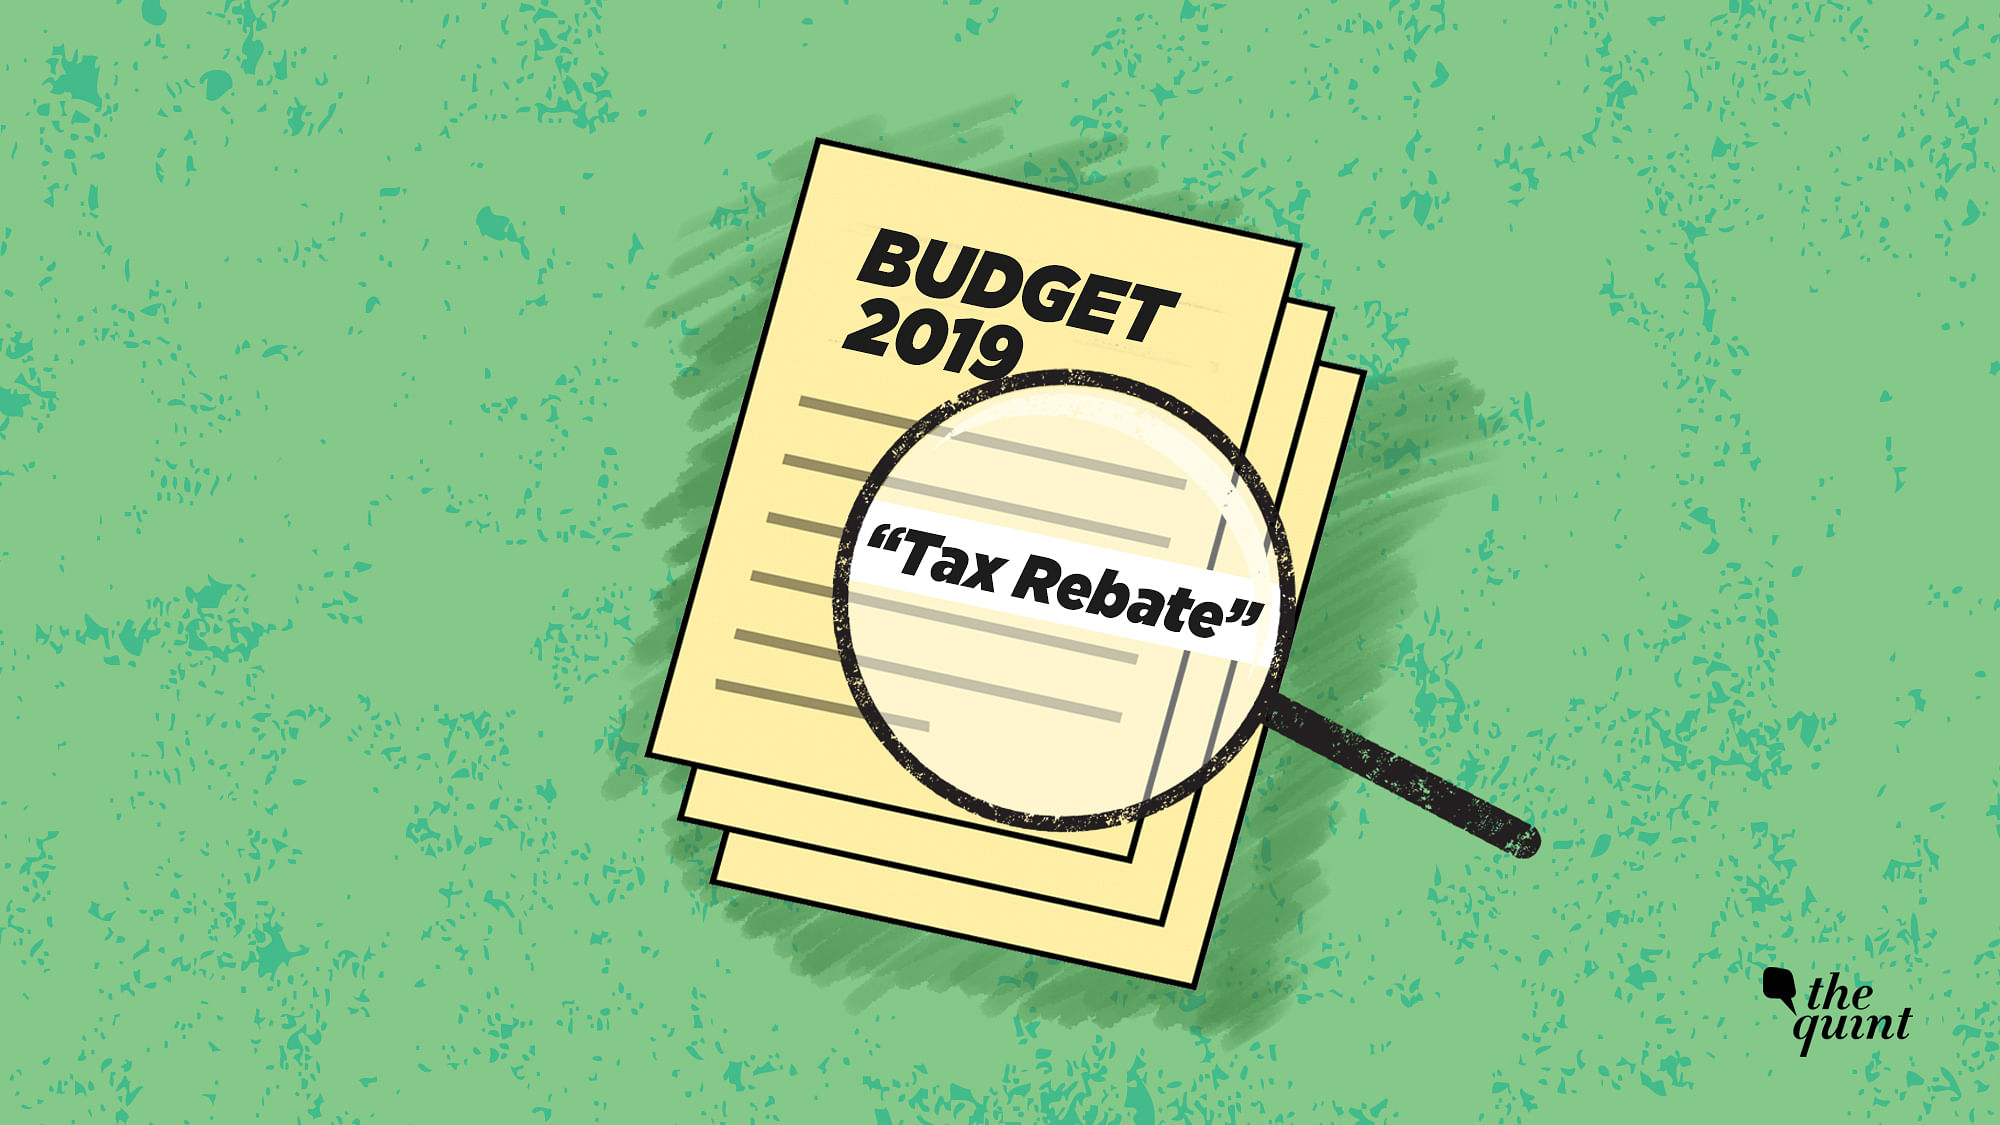 One of the biggest takeaways from the interim budget presented by Finance Minister Piyush Goyal on Friday, 1 February, was the announcement of a full tax rebate for annual incomes up to Rs 5 lakhs.